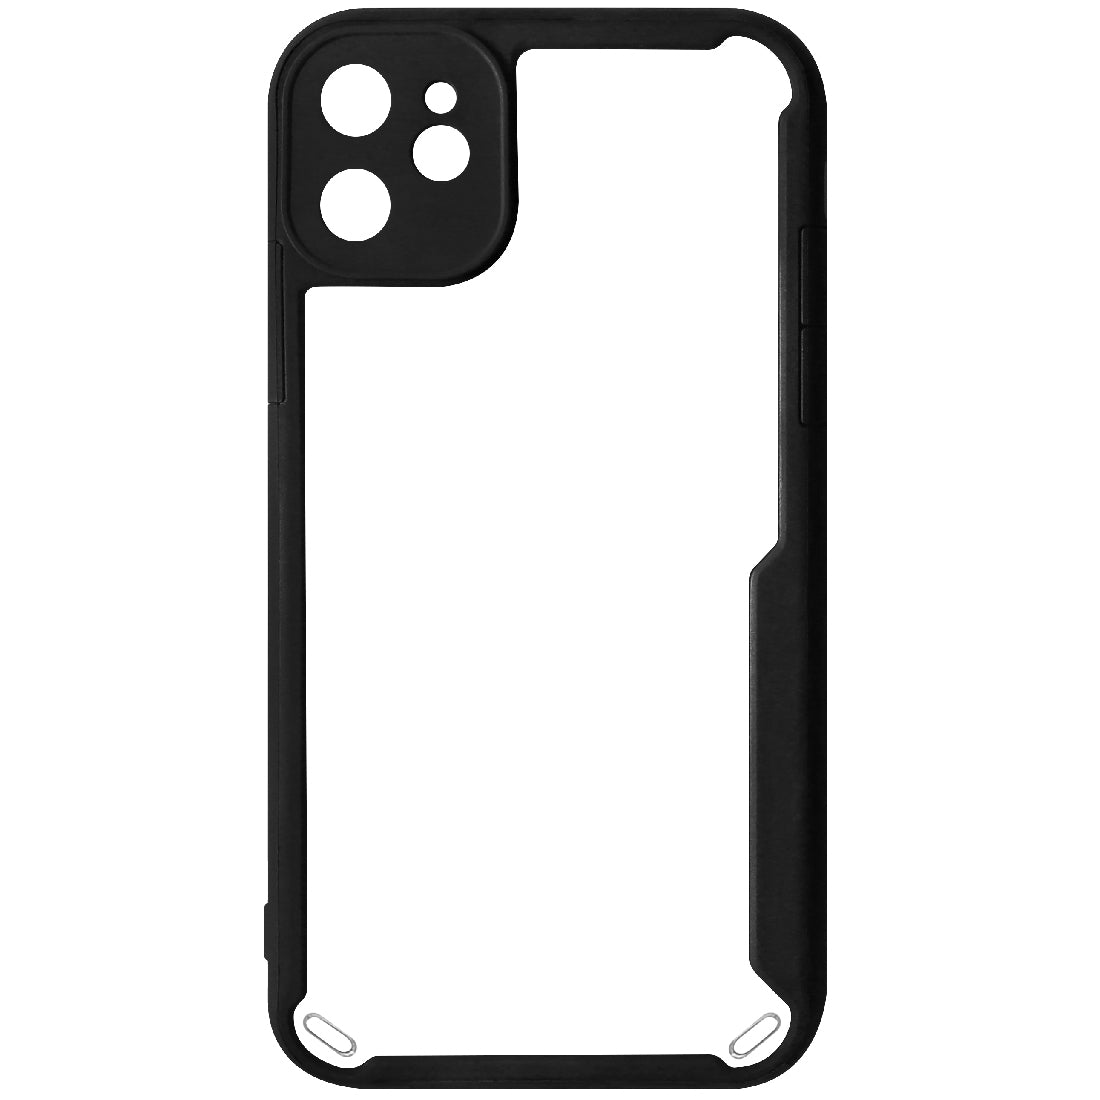 Shockproof Hybrid Cover for Apple iPhone 11